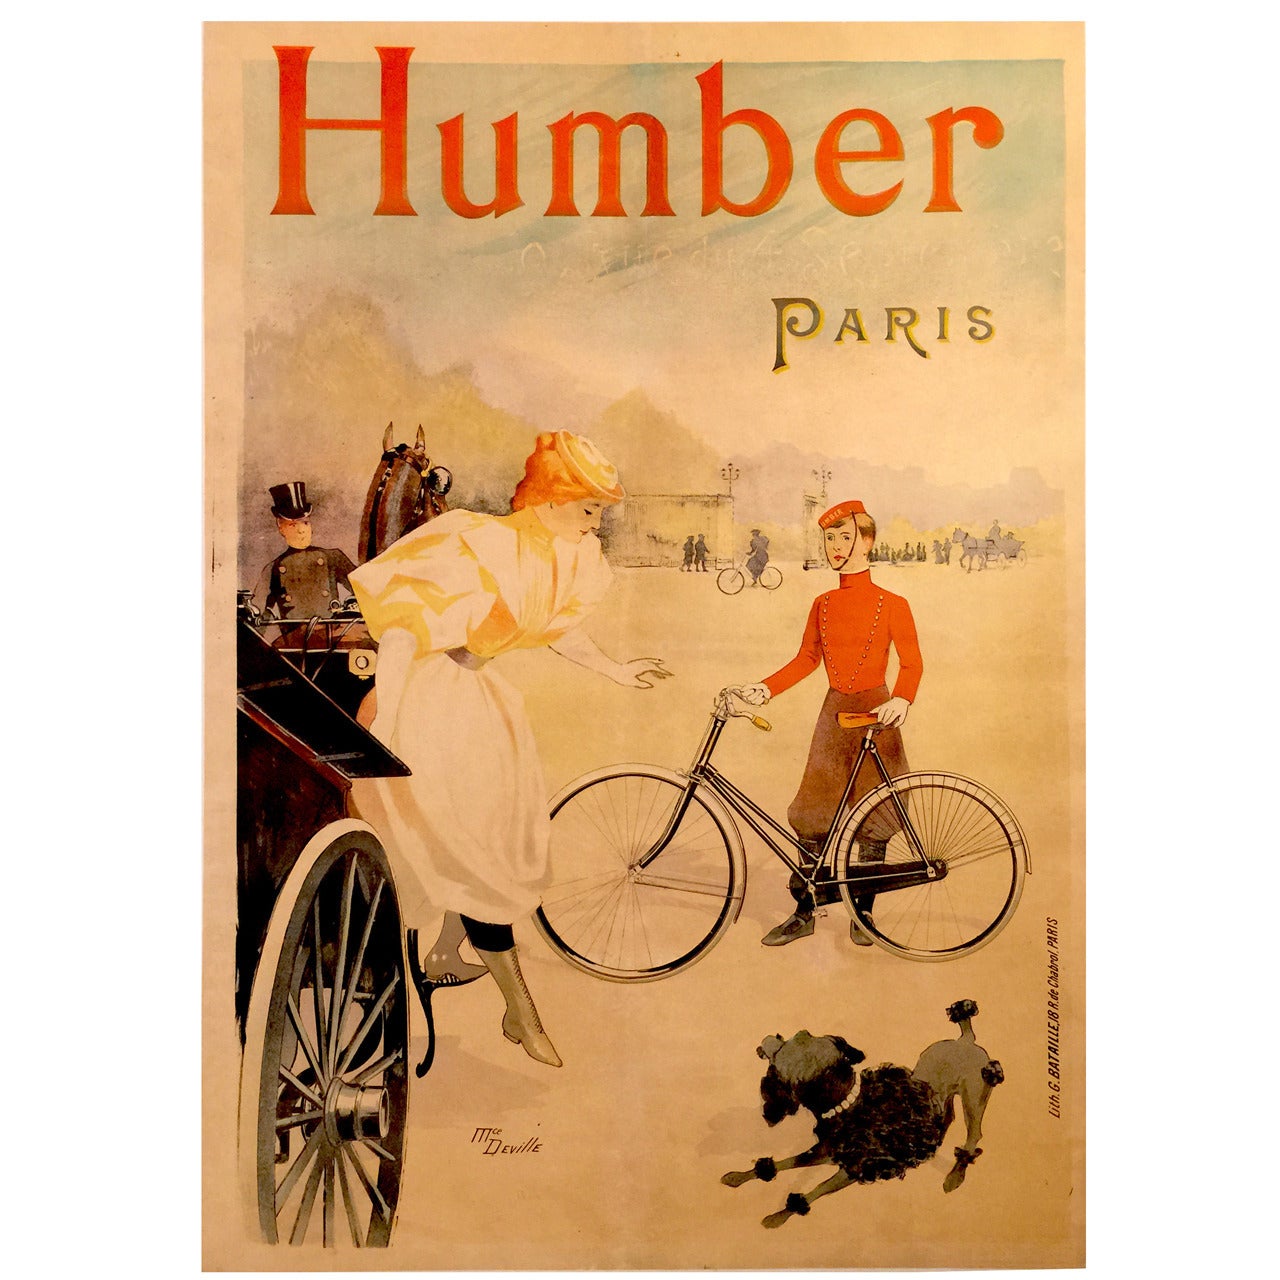 Belle Epoque Period French Poster for Humber Bicycles, Paris